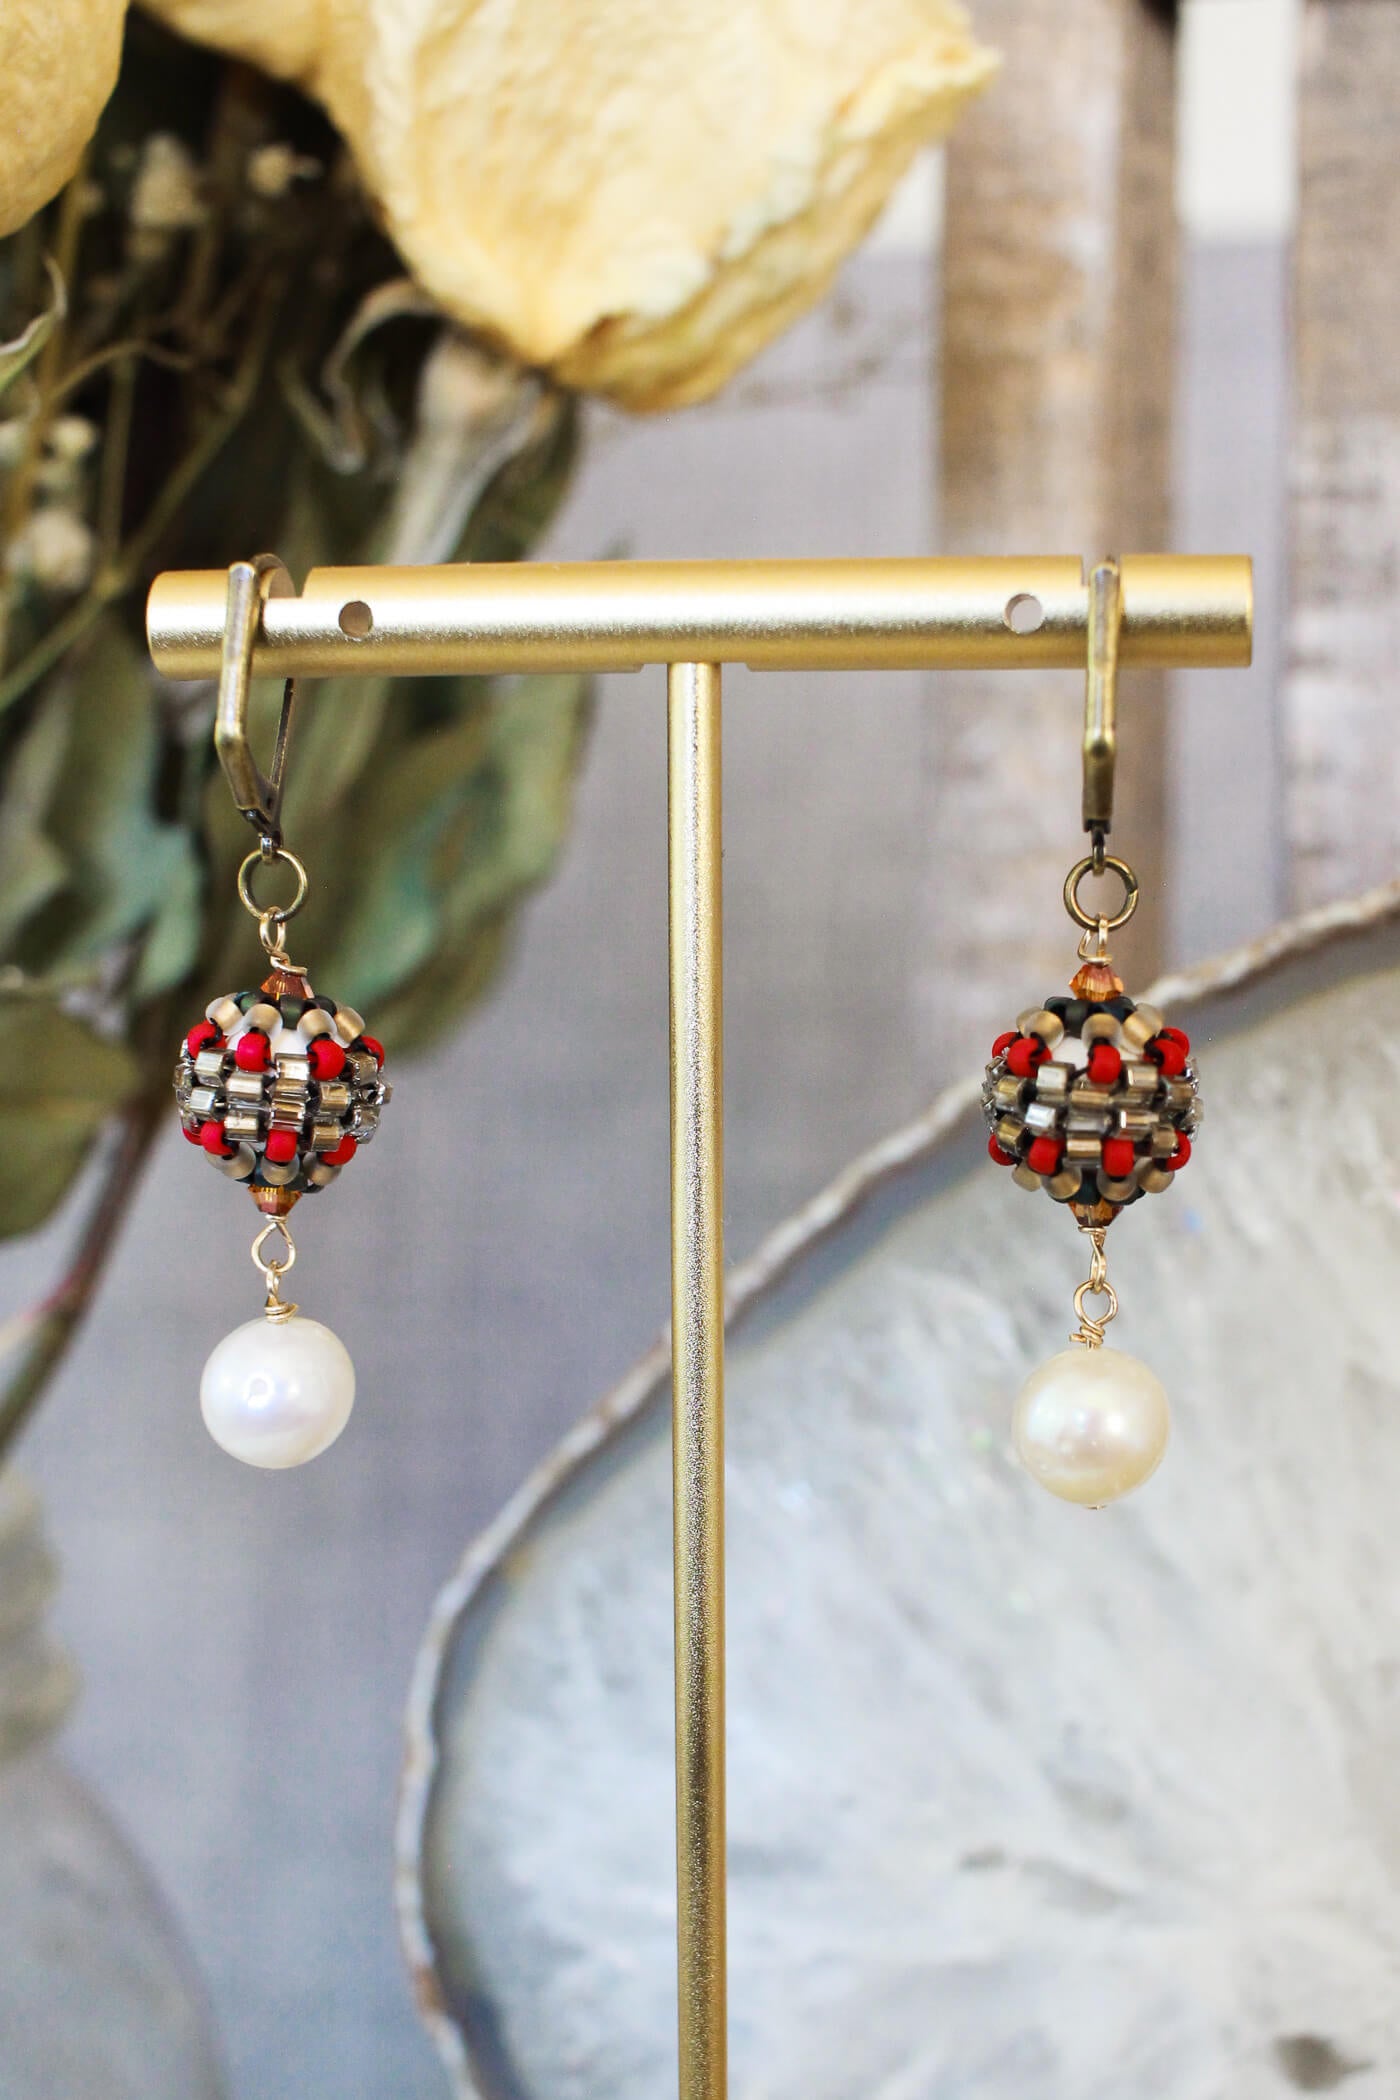 Pearl drop earrings designed with something old and something new for the vintage soul. #pearlearrings #pearldropearrings #dangleanddropearrigs #dangleearrings